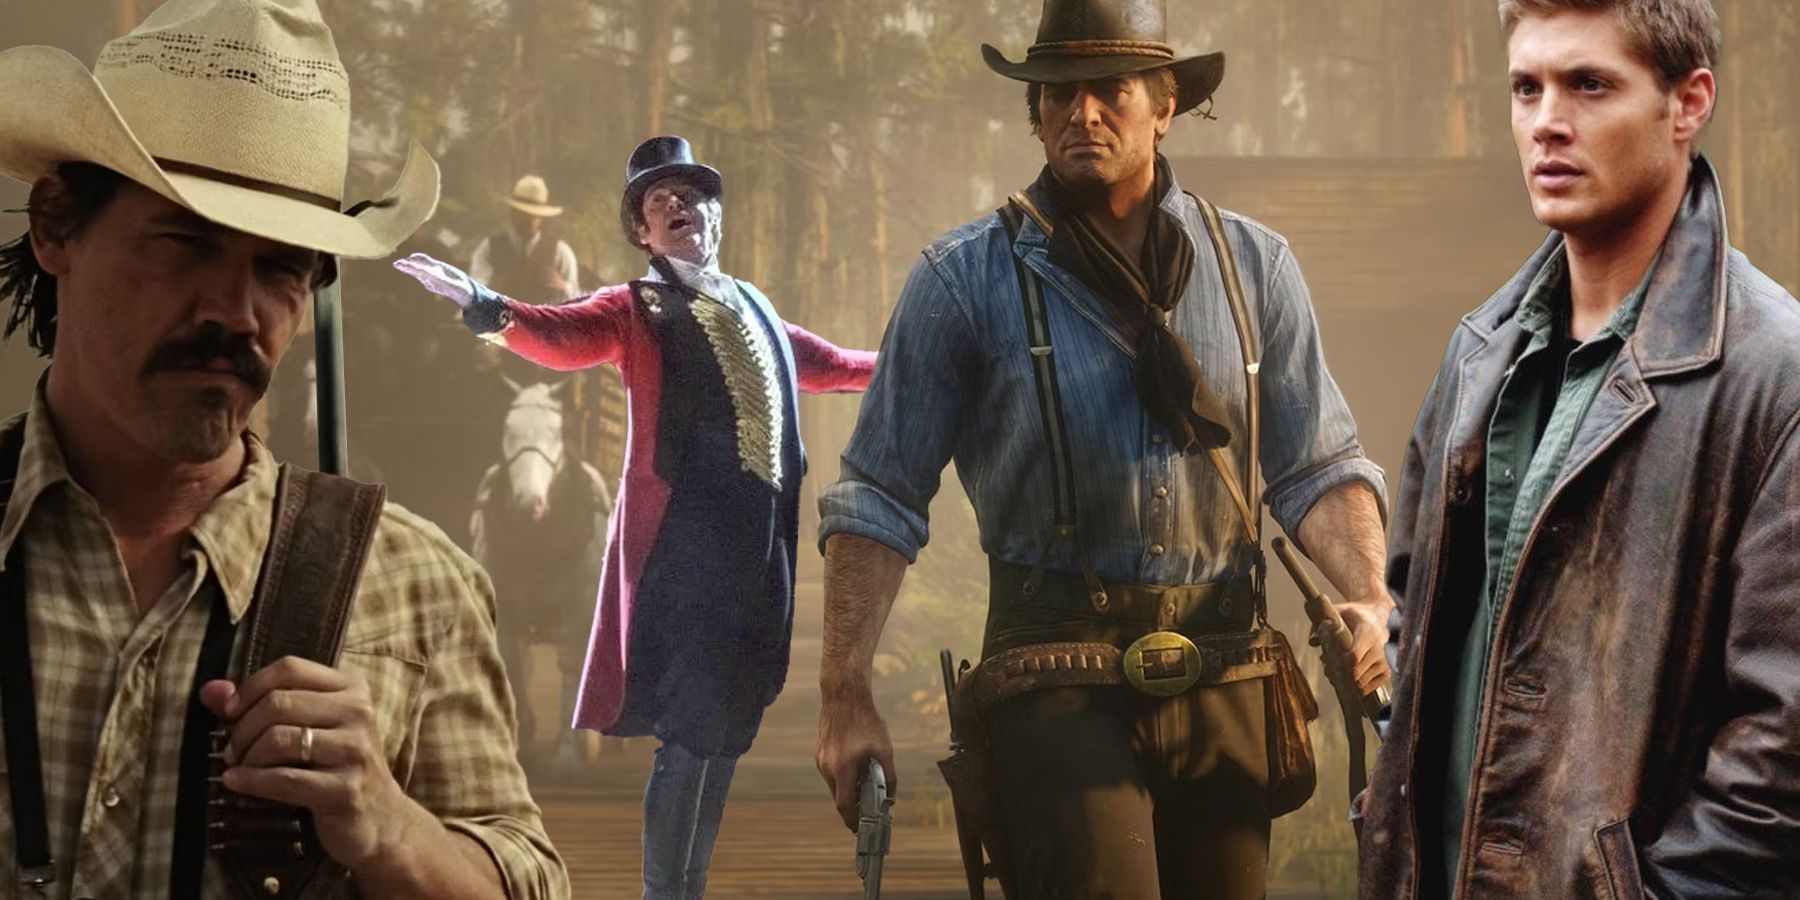 Red-Dead-Redemption-2-11-Actors-Who-Could-Play-Arthur-Morgan